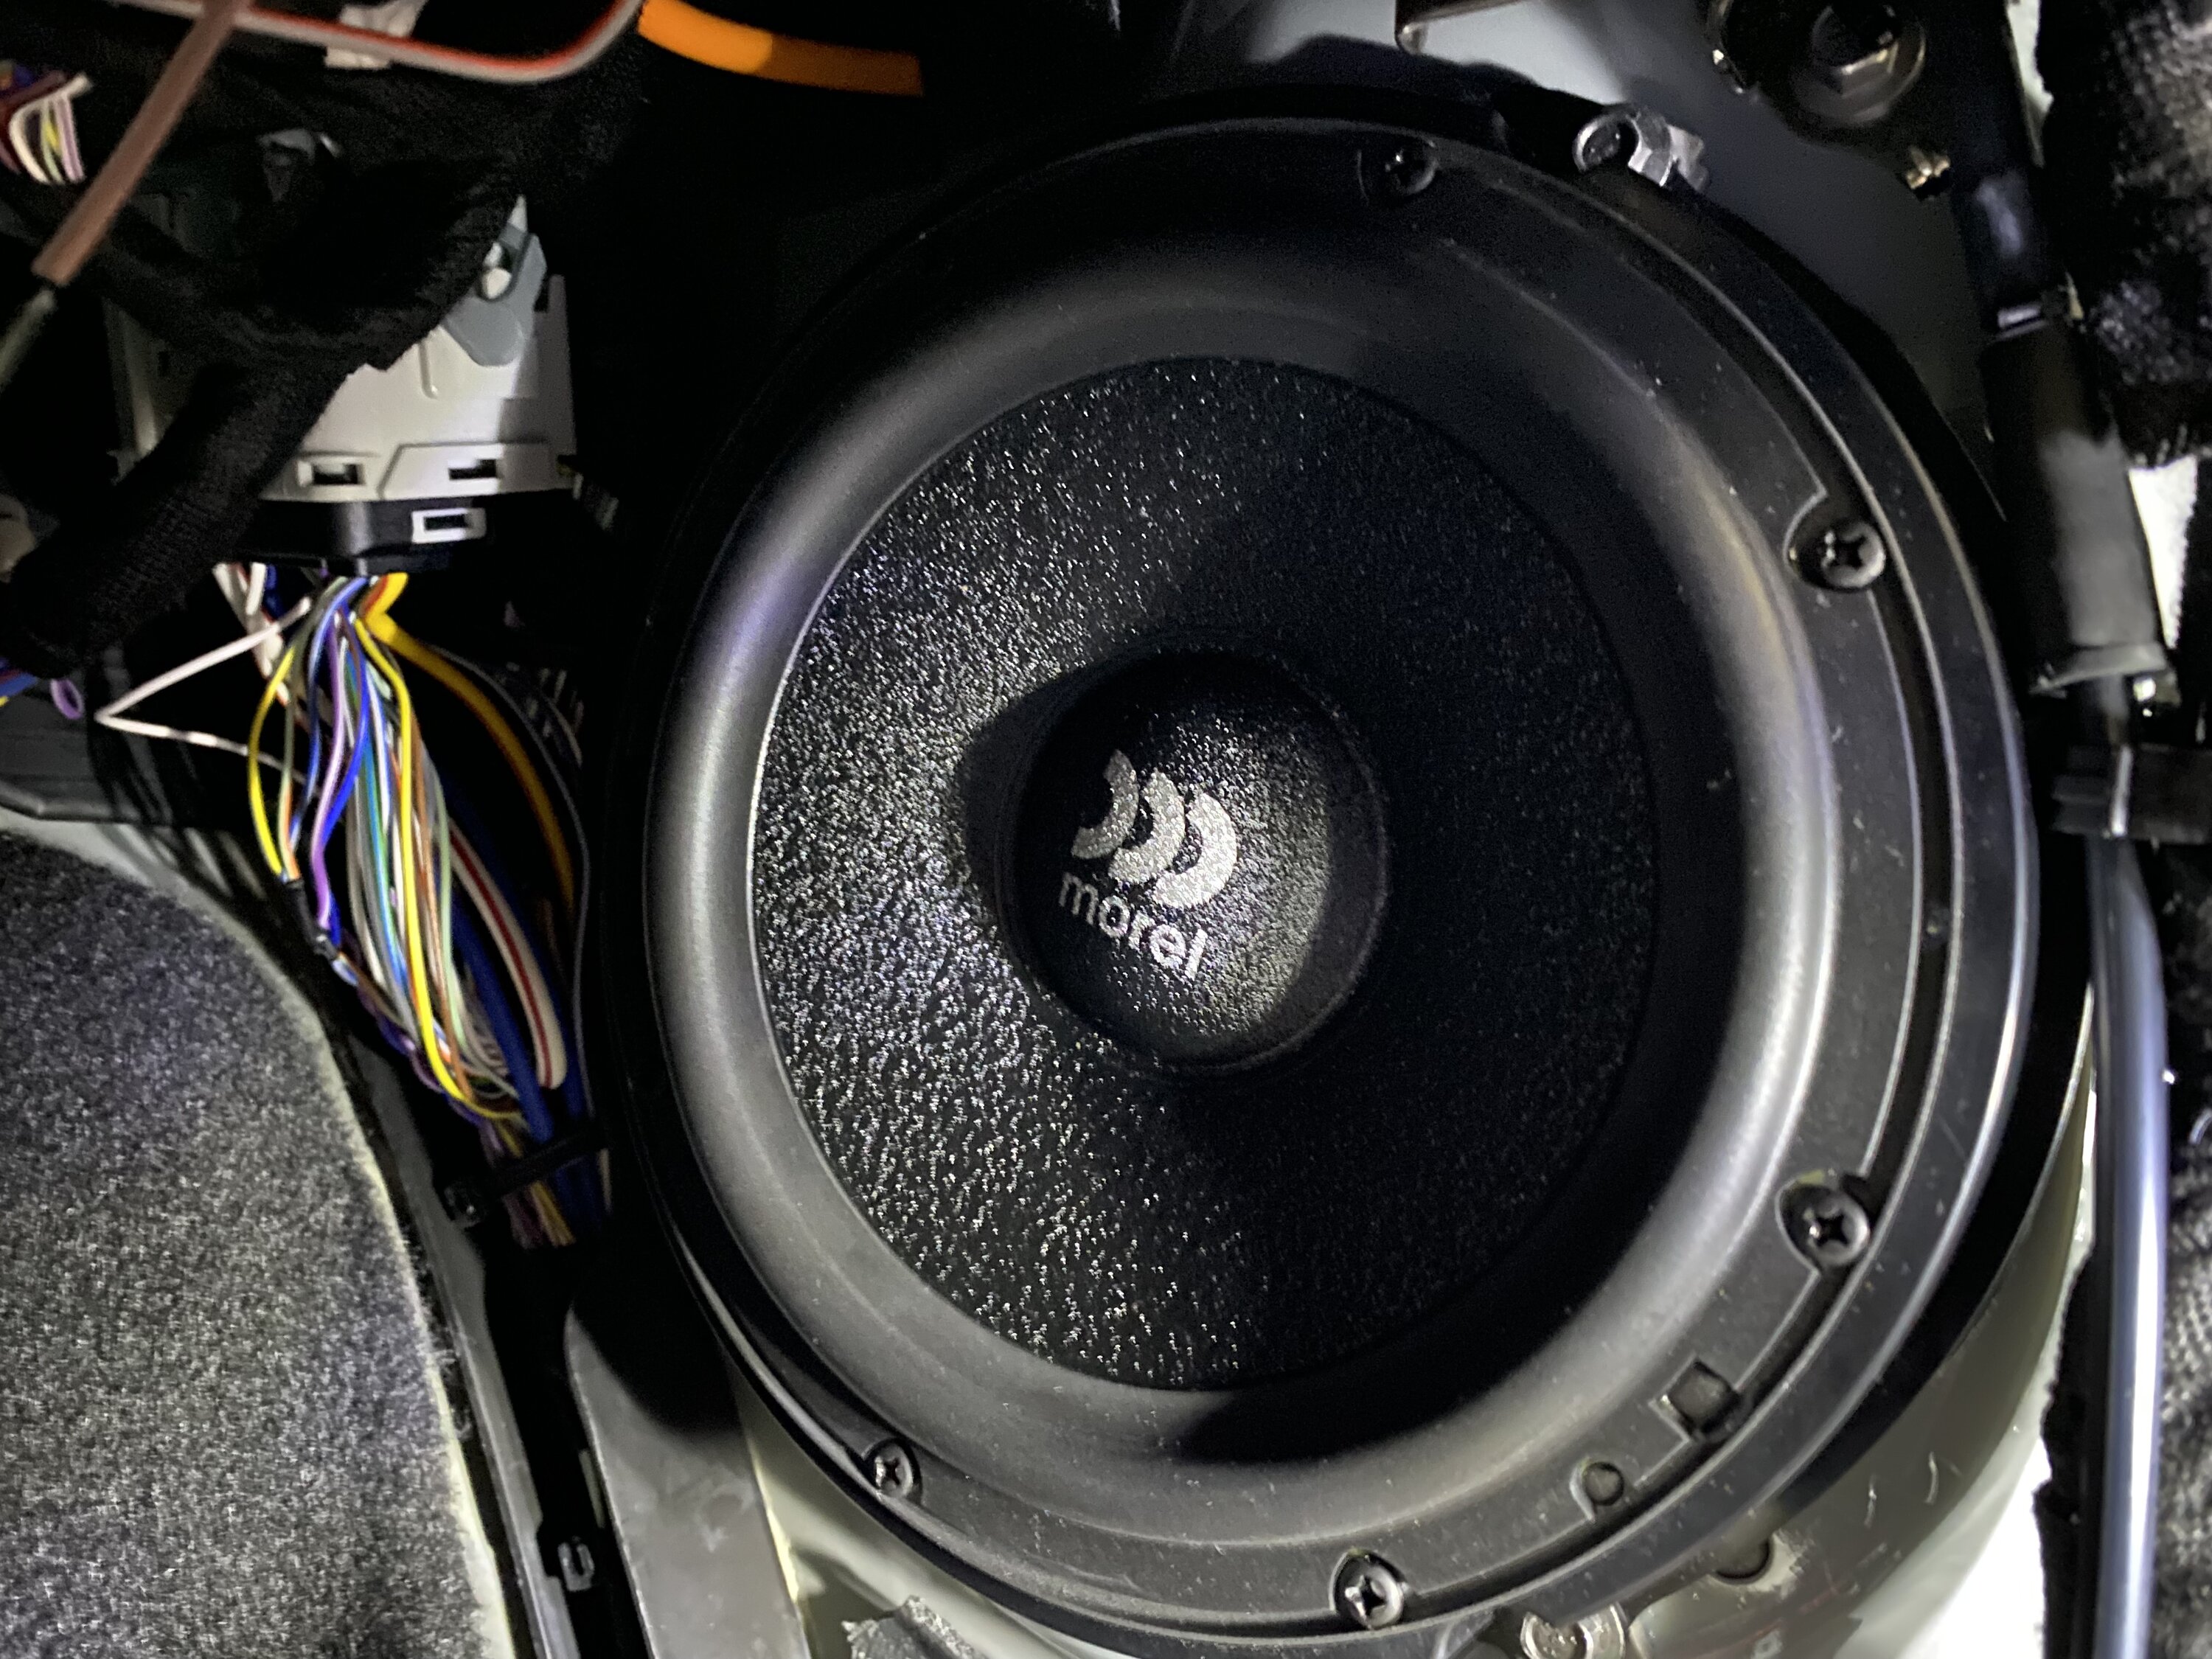 Ford Bronco Component speakers are worth the extra effort IMG_6685